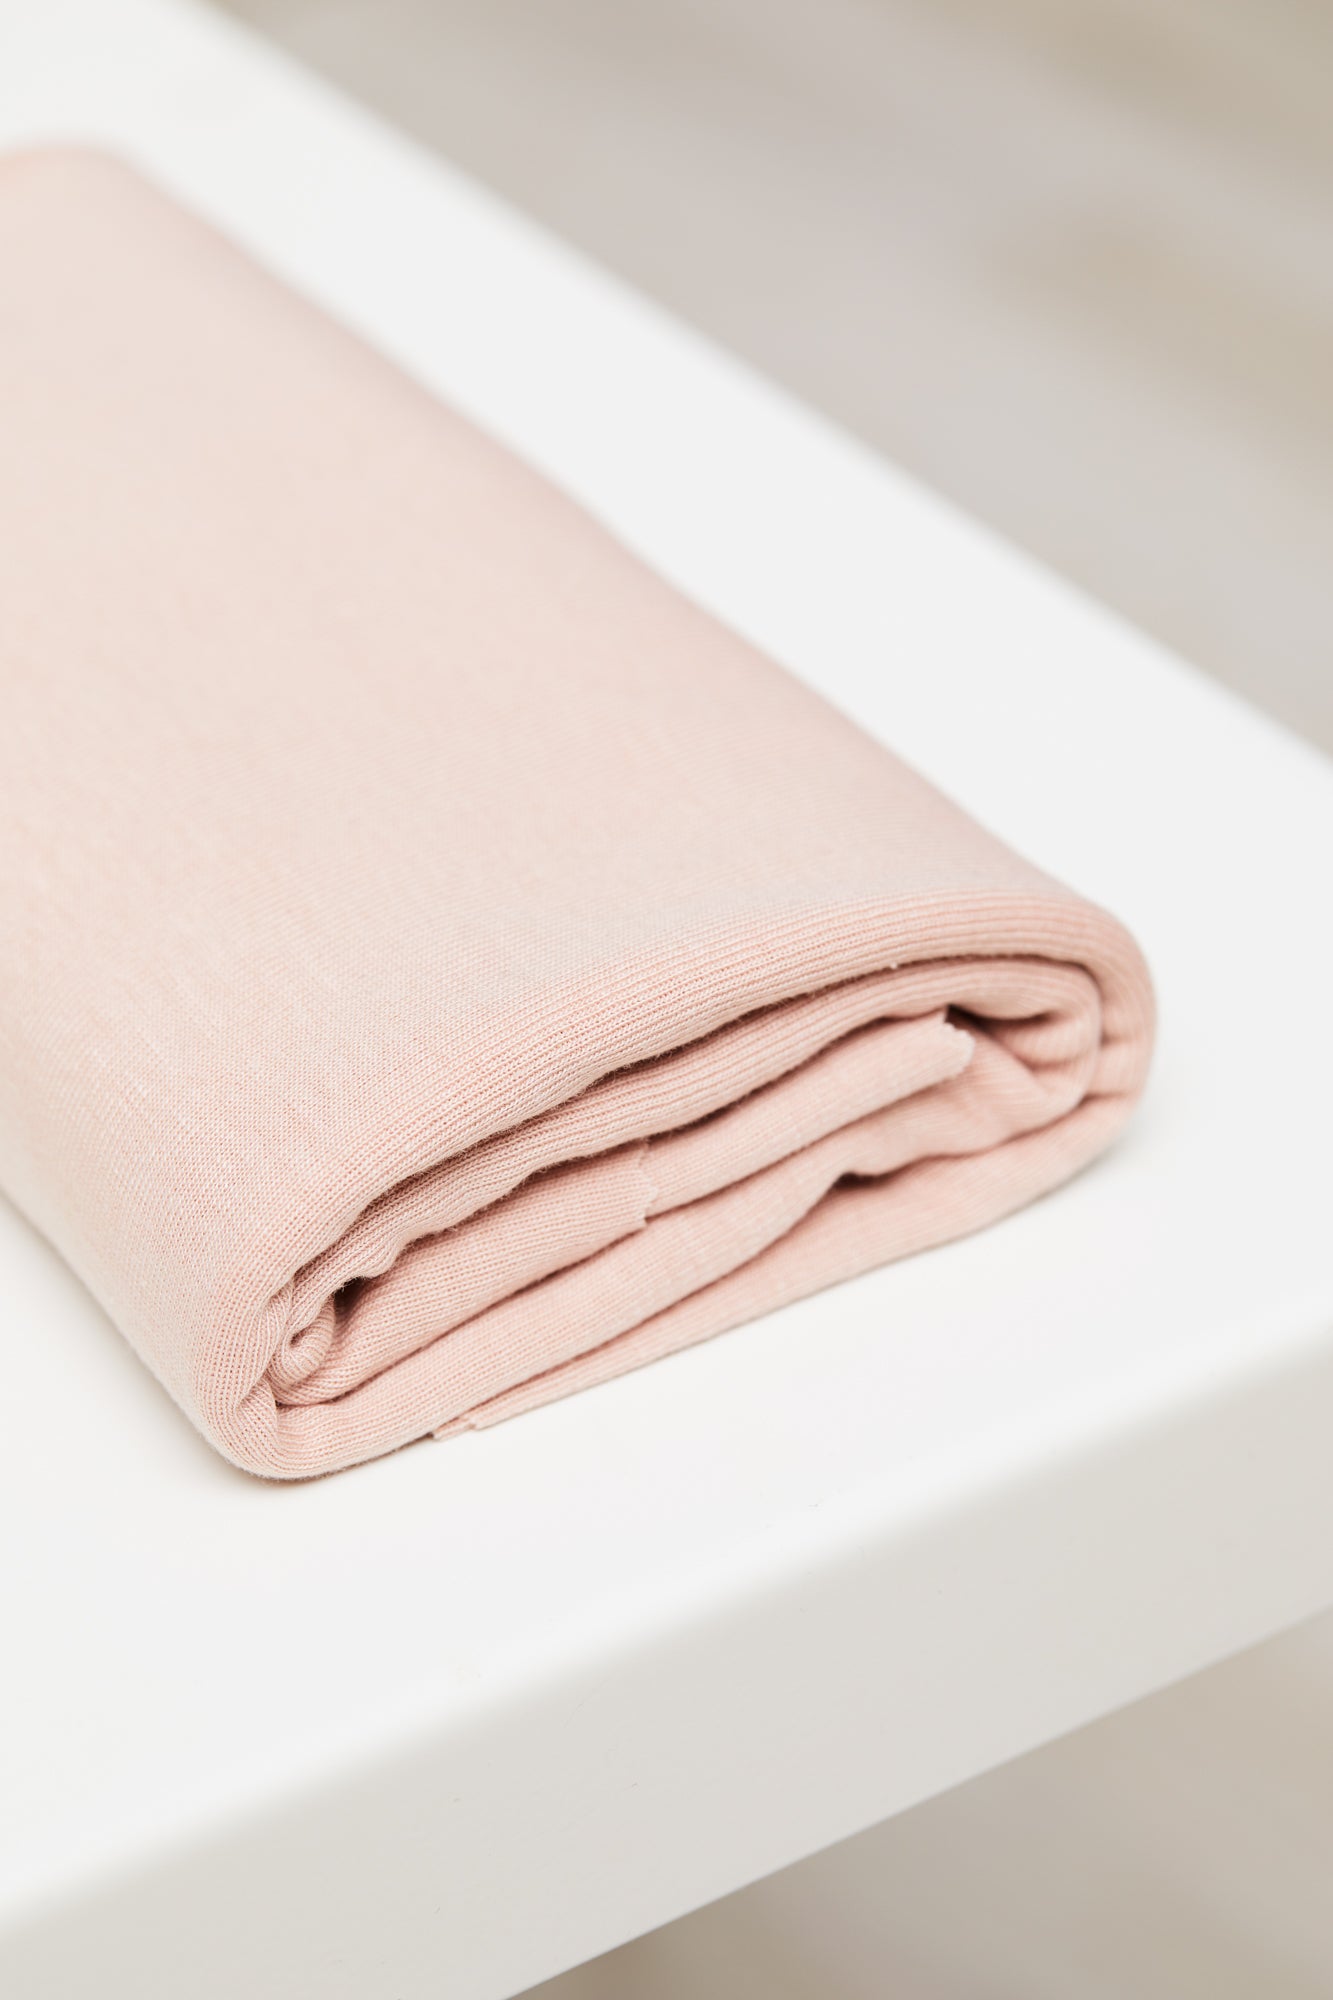 Powder pink organic cotton and tencel knit jersey fabric folded on top of white table